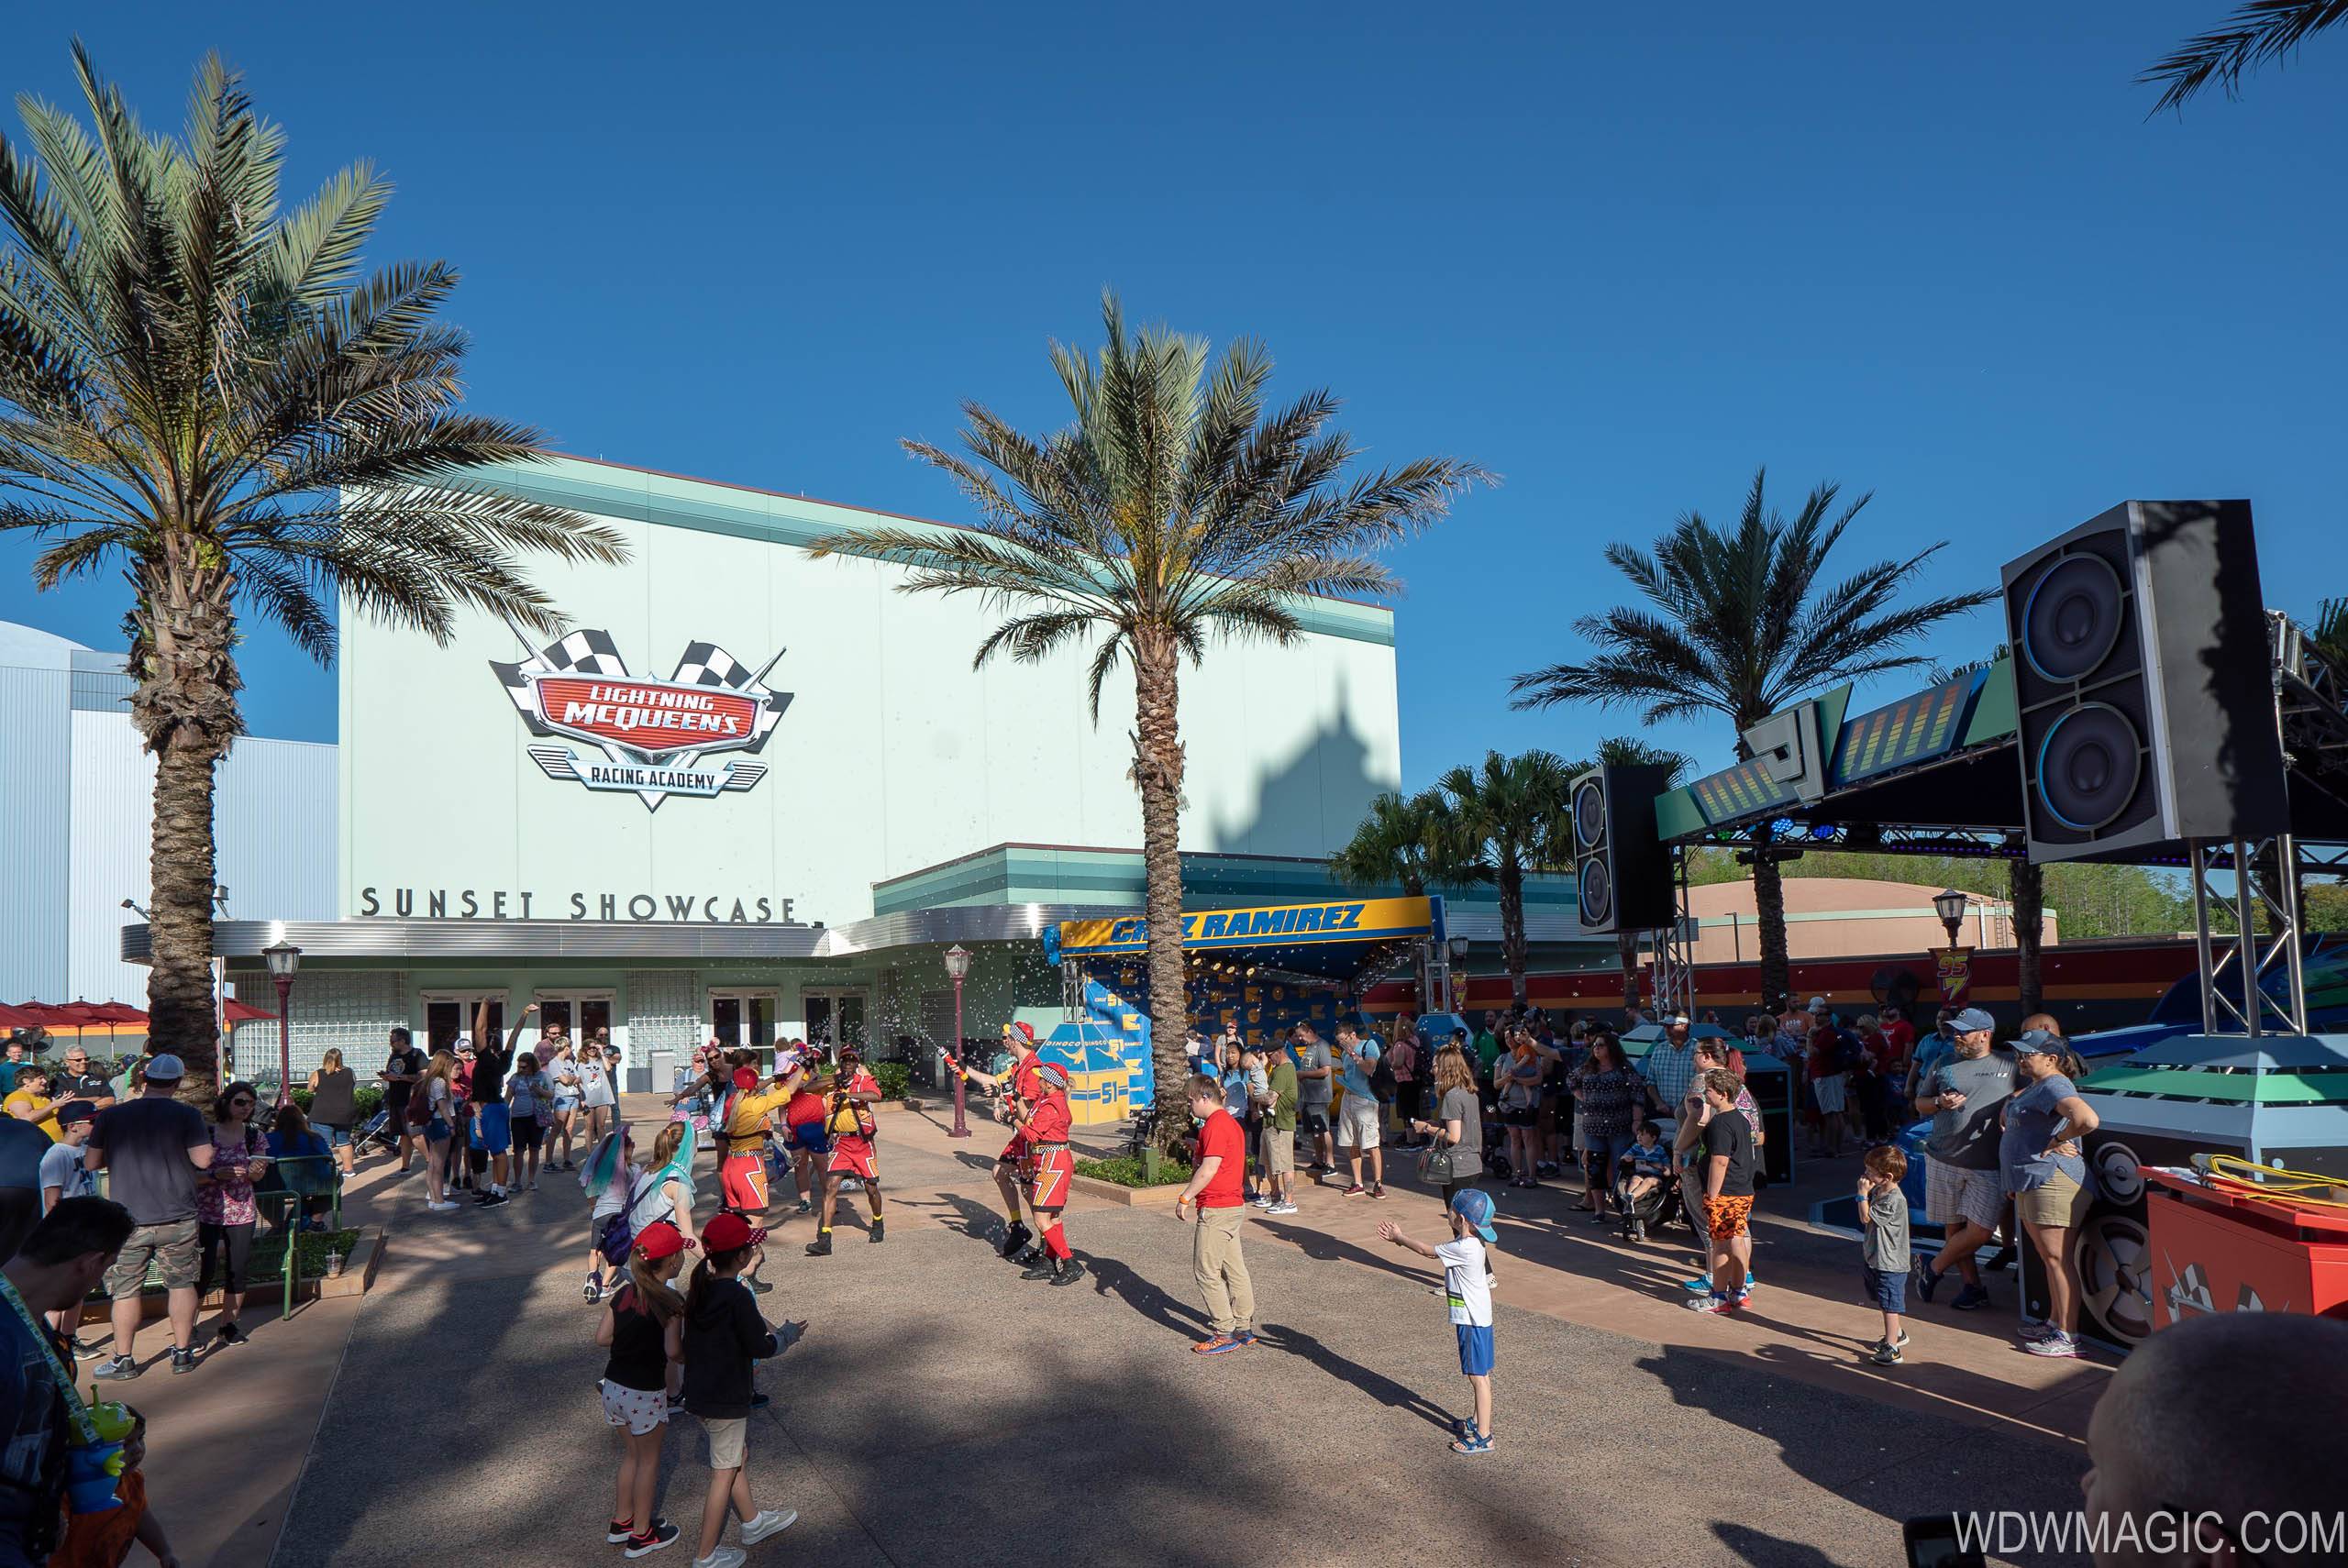 How Disney World put together its new Lightning McQueen attraction